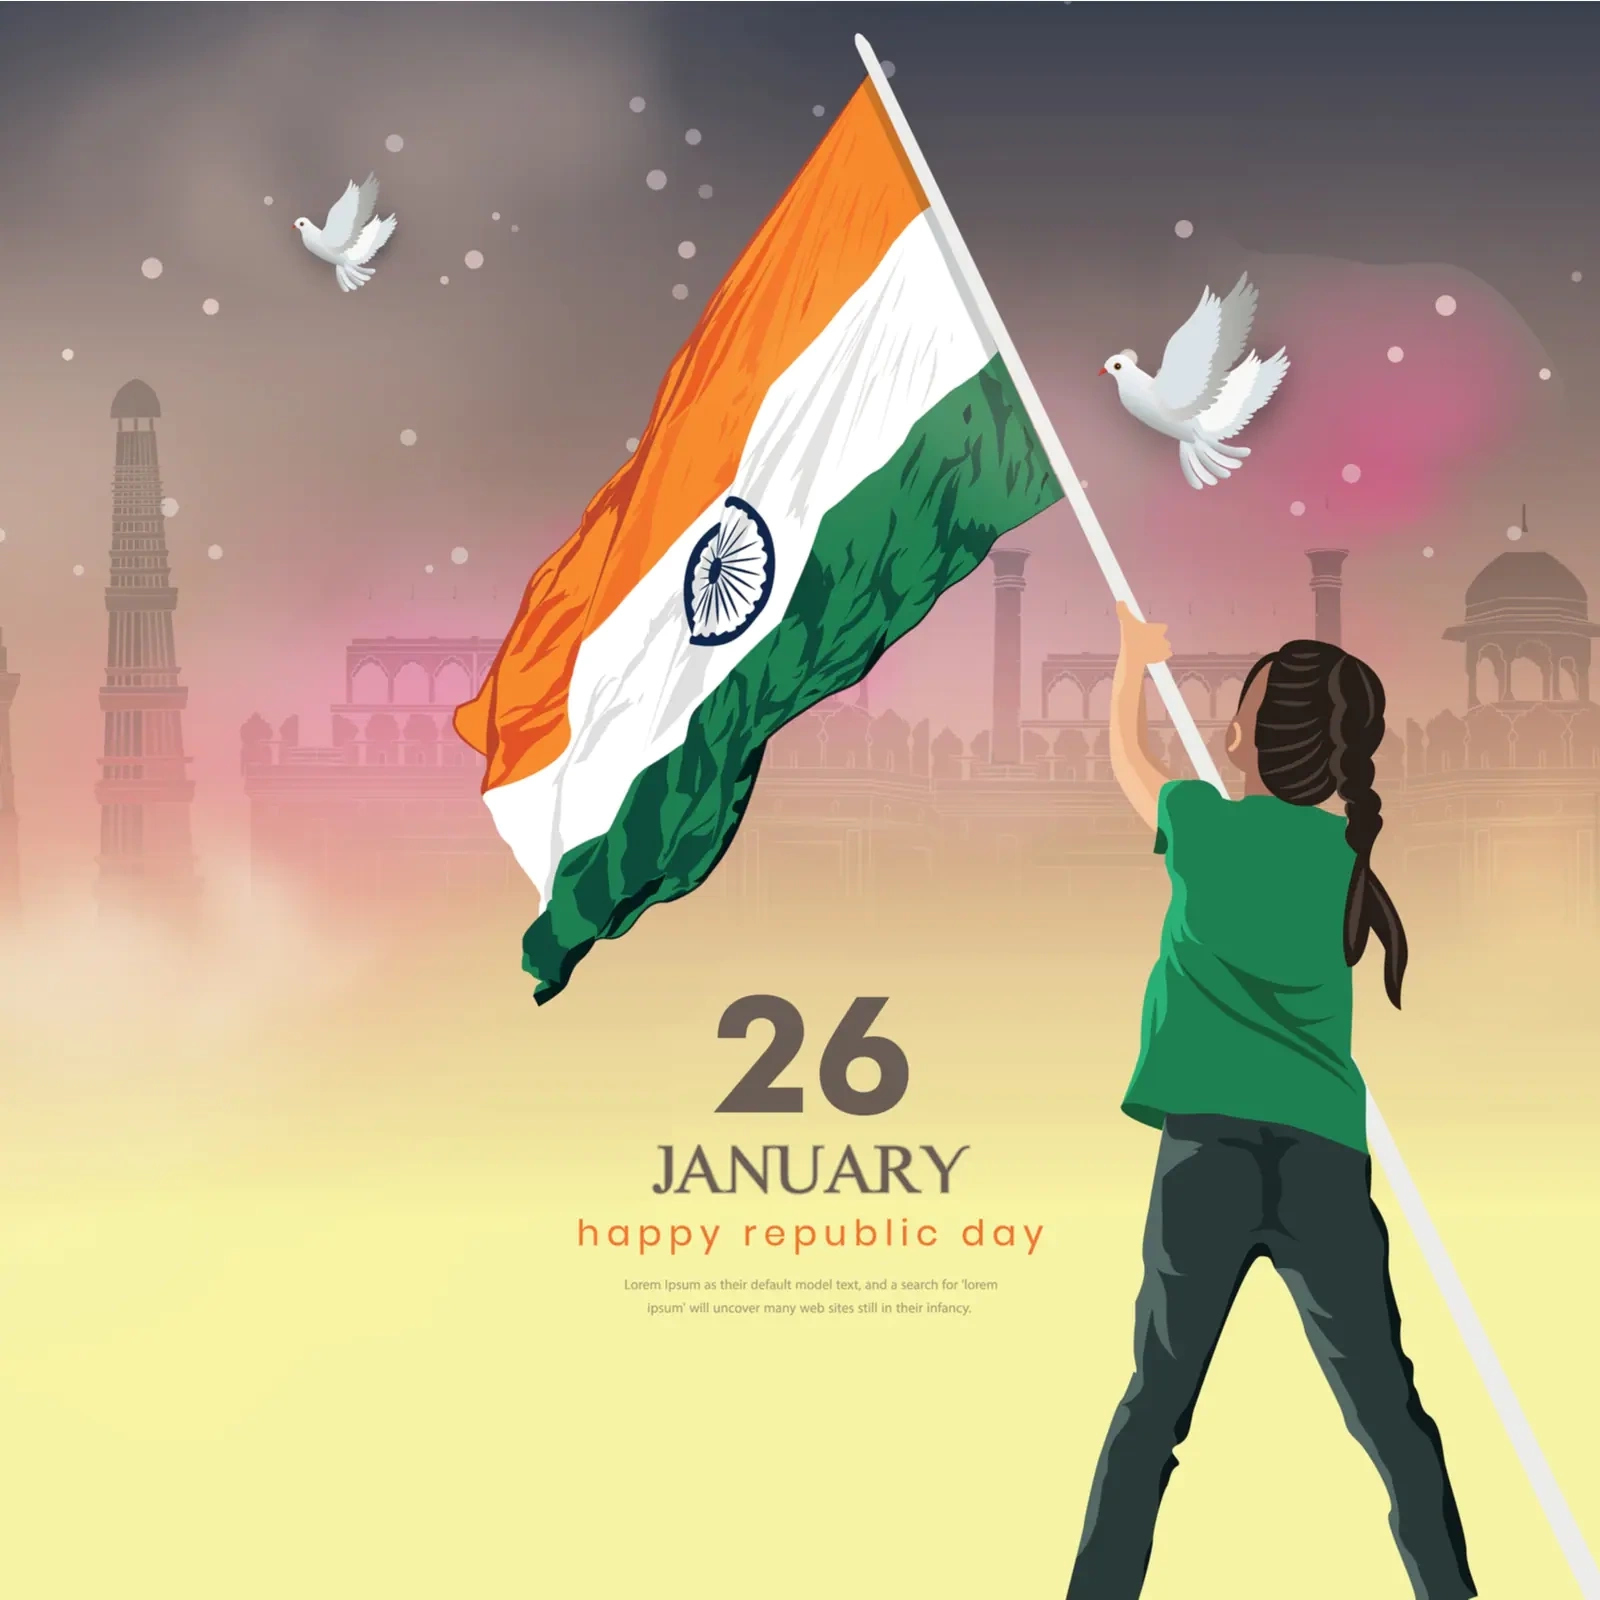 Republic Day 2022: Taapsee Pannu, Amitabh Bachchan and others Bollywood celebs share R-Day wishes